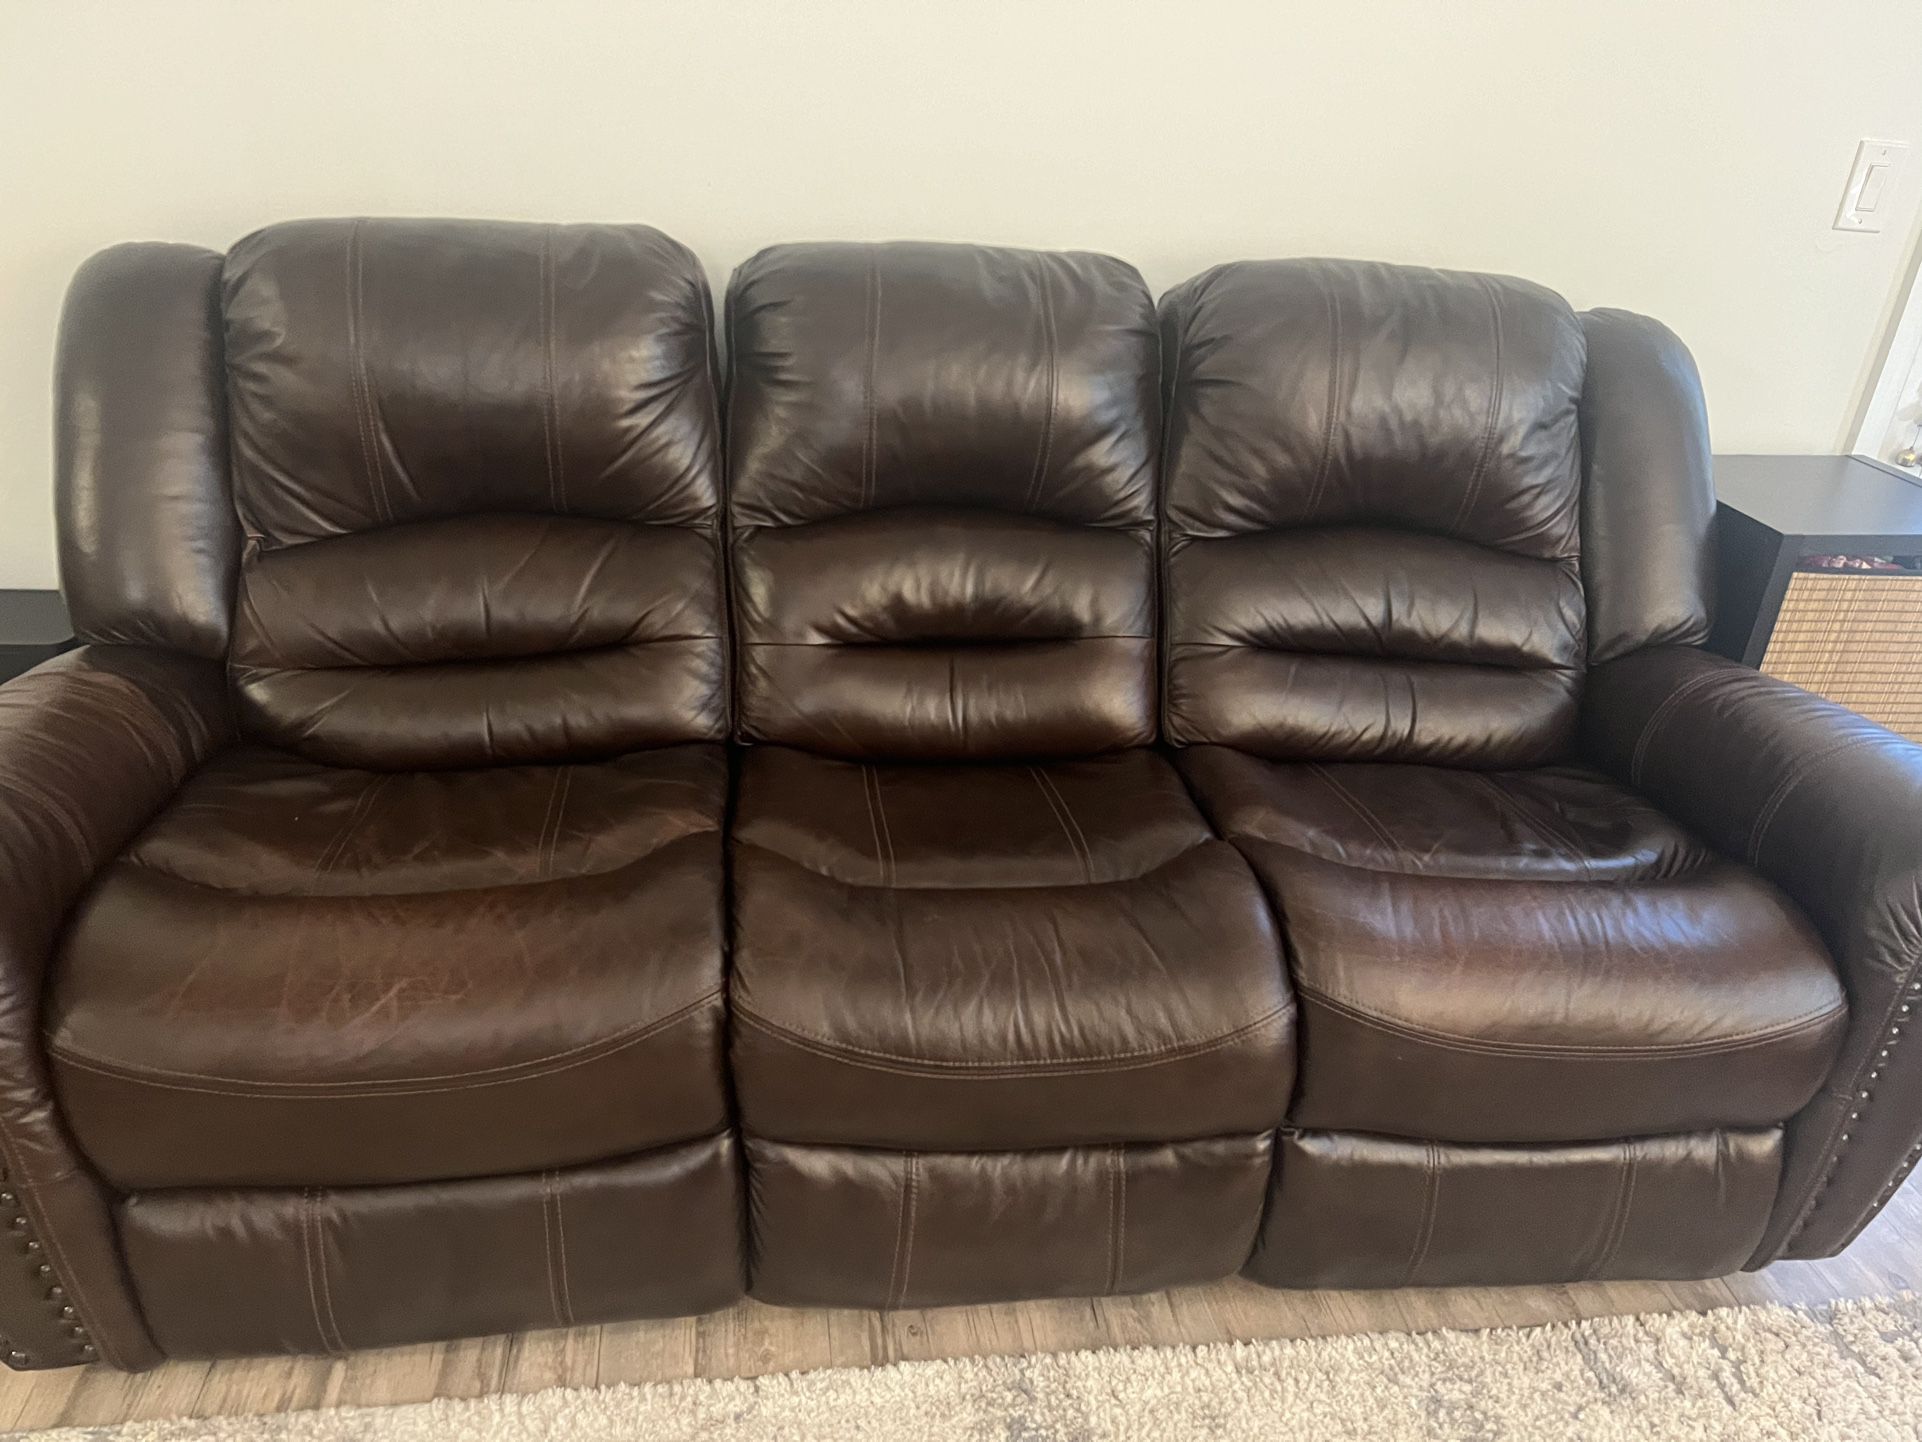 Selling 3 Seater recliner 